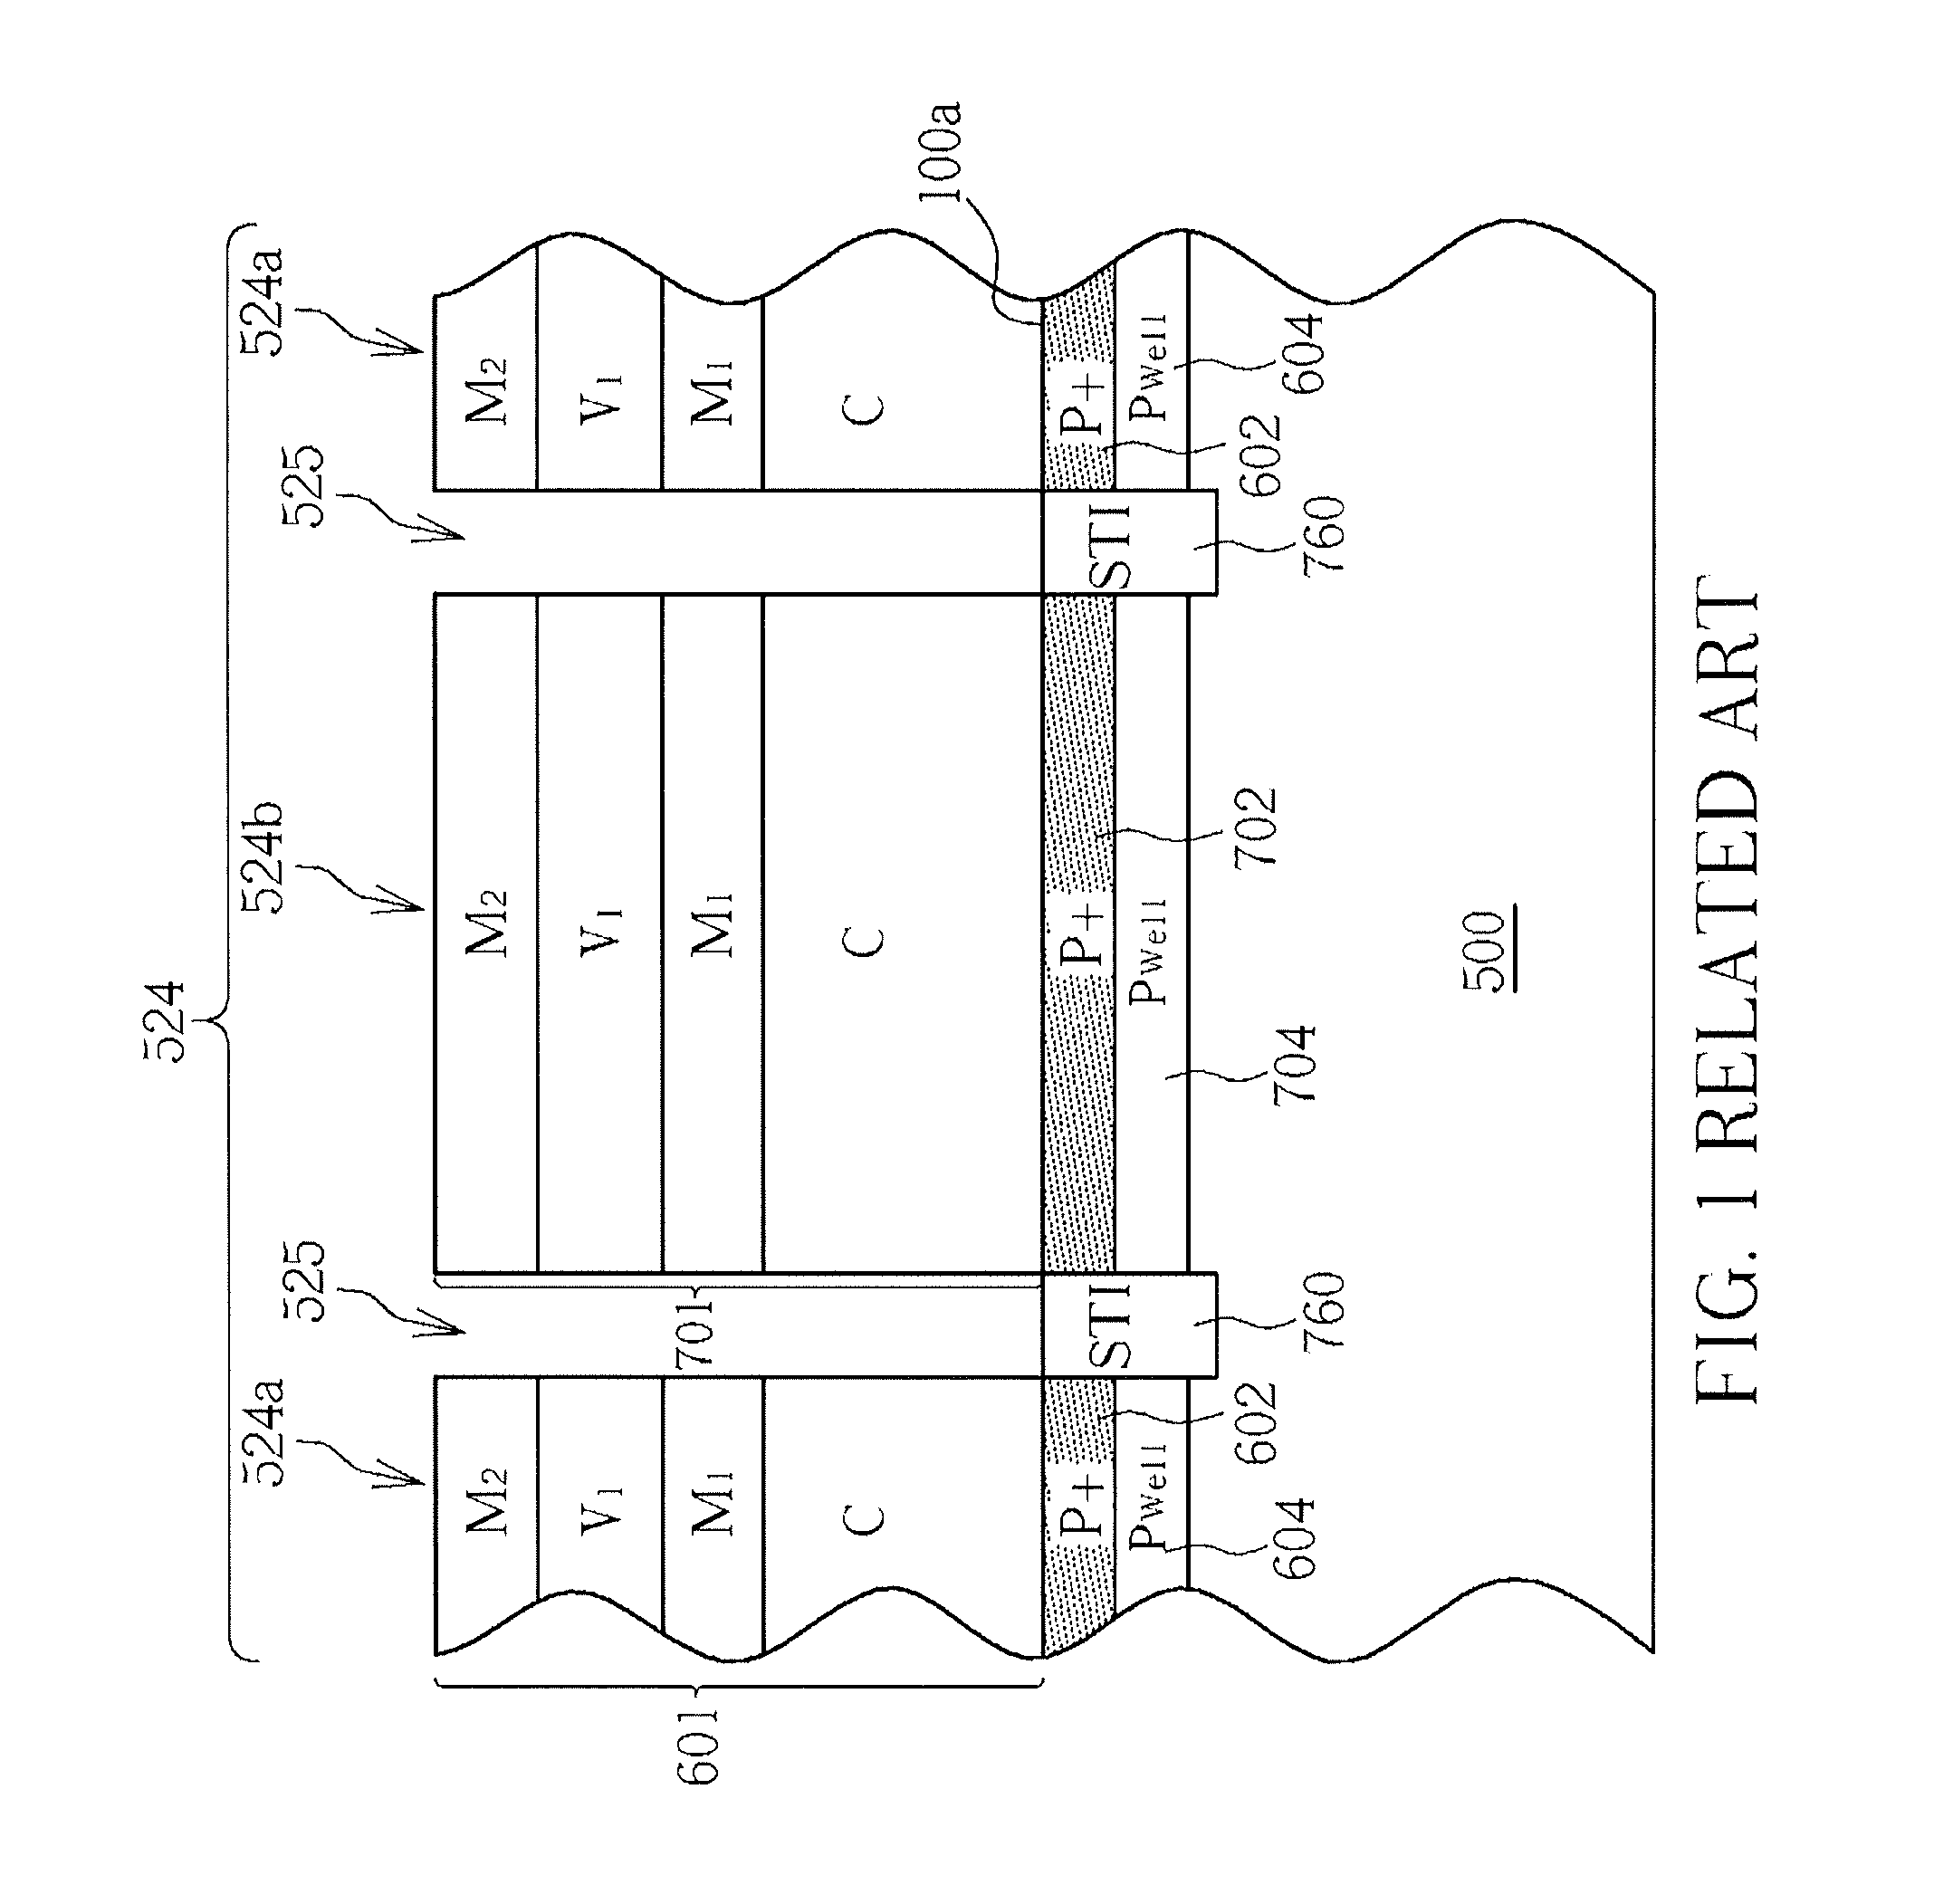 Seal ring structure for integrated circuits